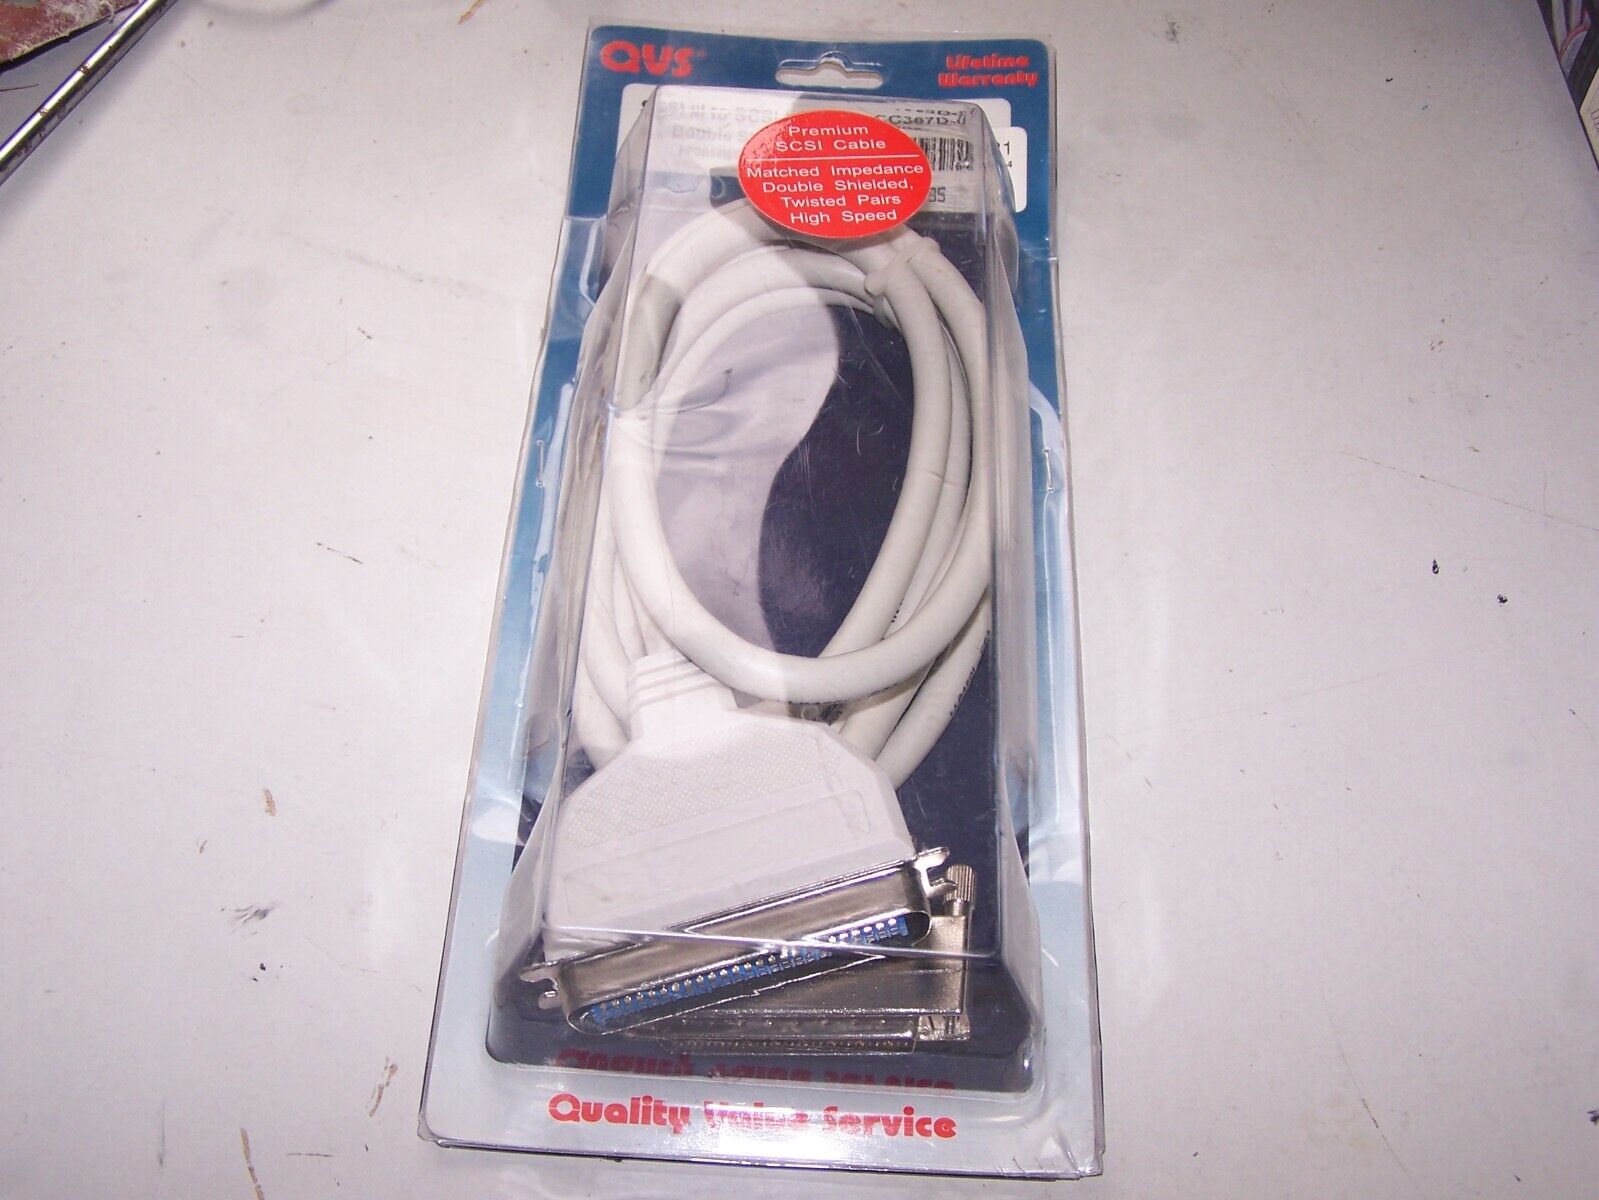 SCSI III to SCSI 1 cable New Old Stock